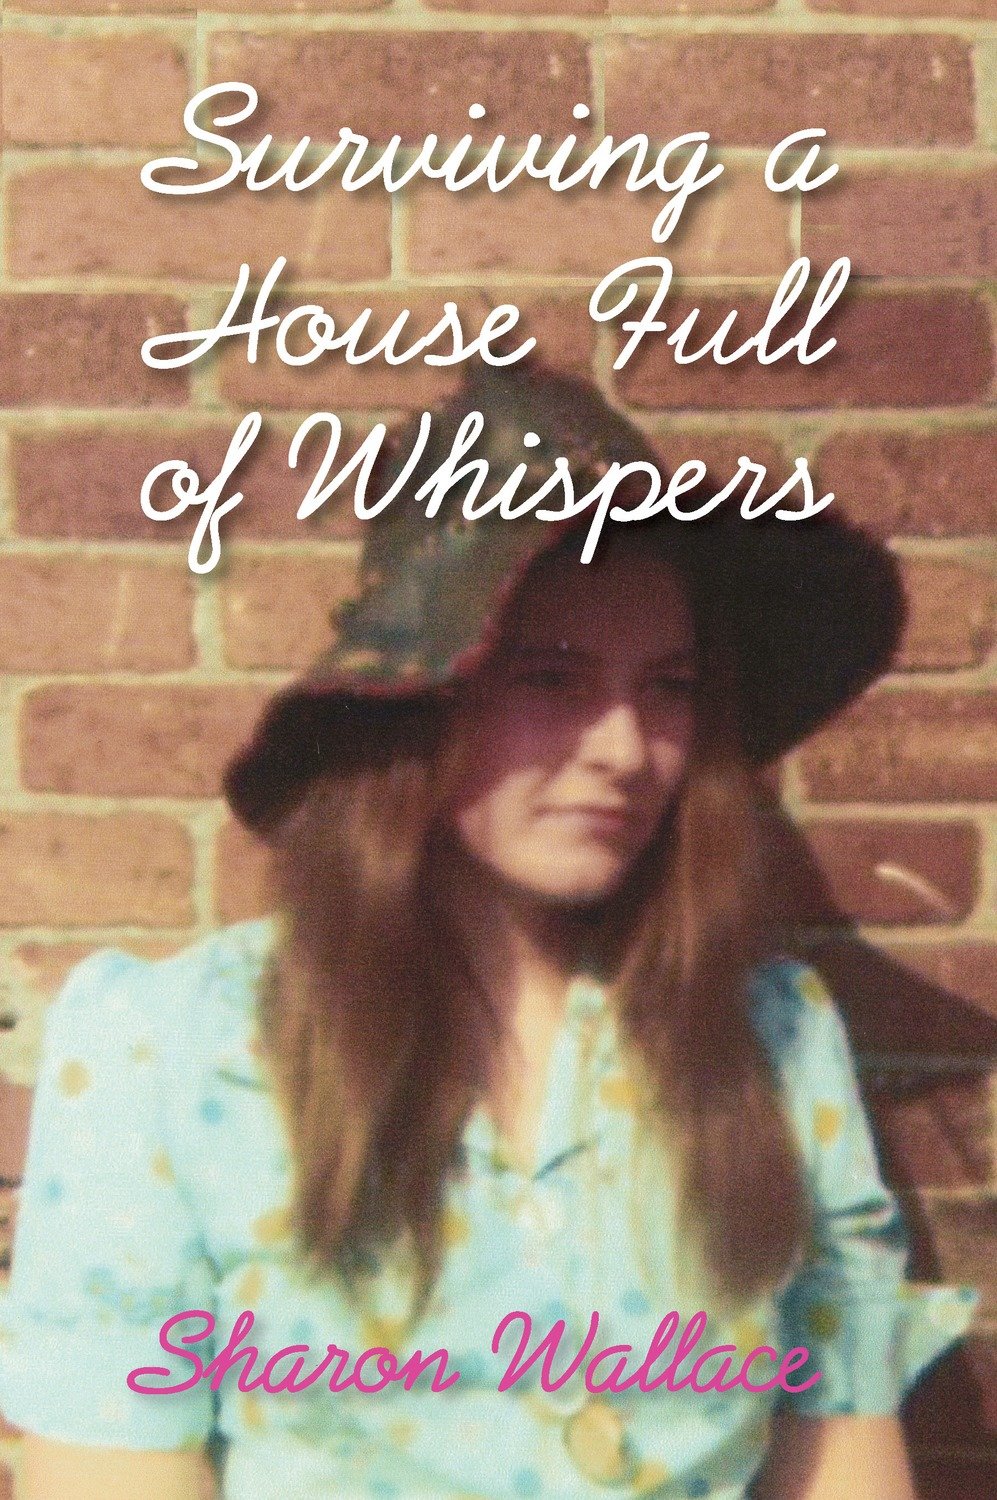 Surviving A House Full of Whispers